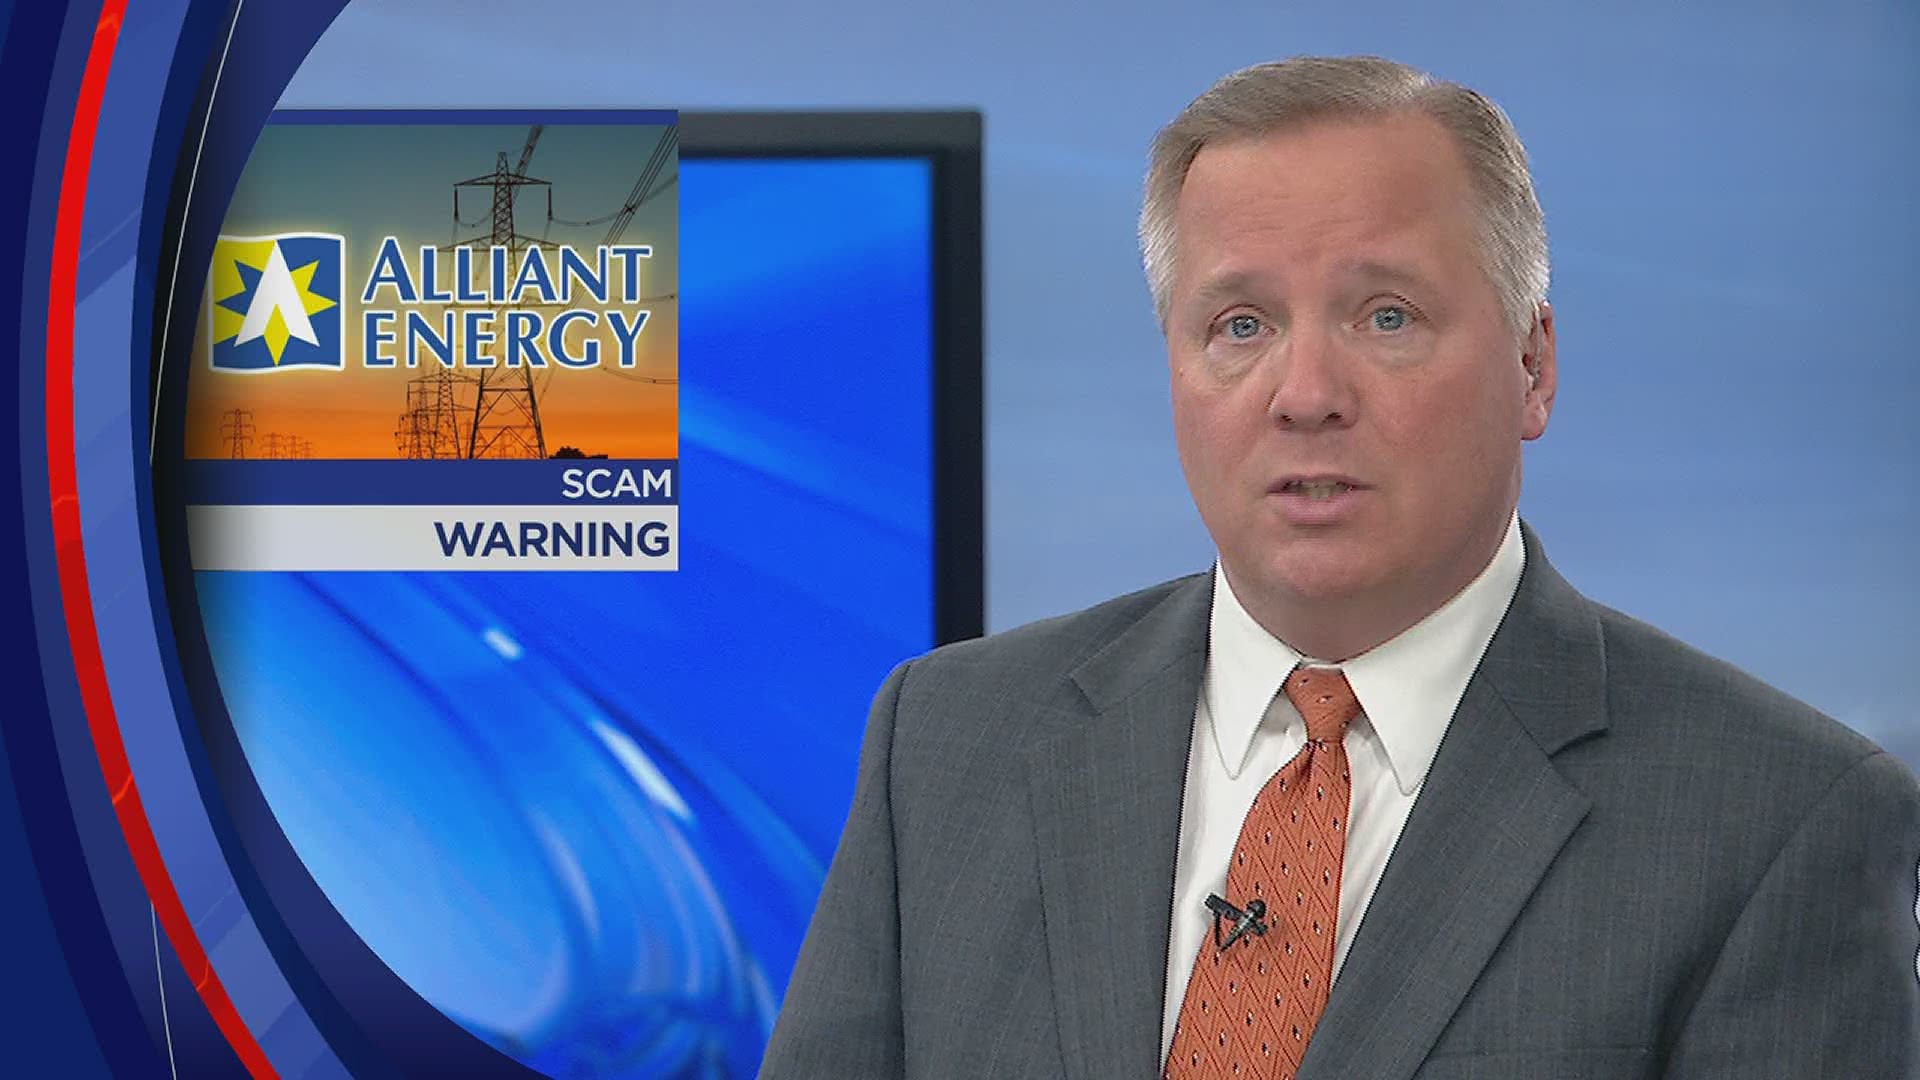 The energy company's Iowa wing is warning customers of a scam call trying to get money out of its customers.